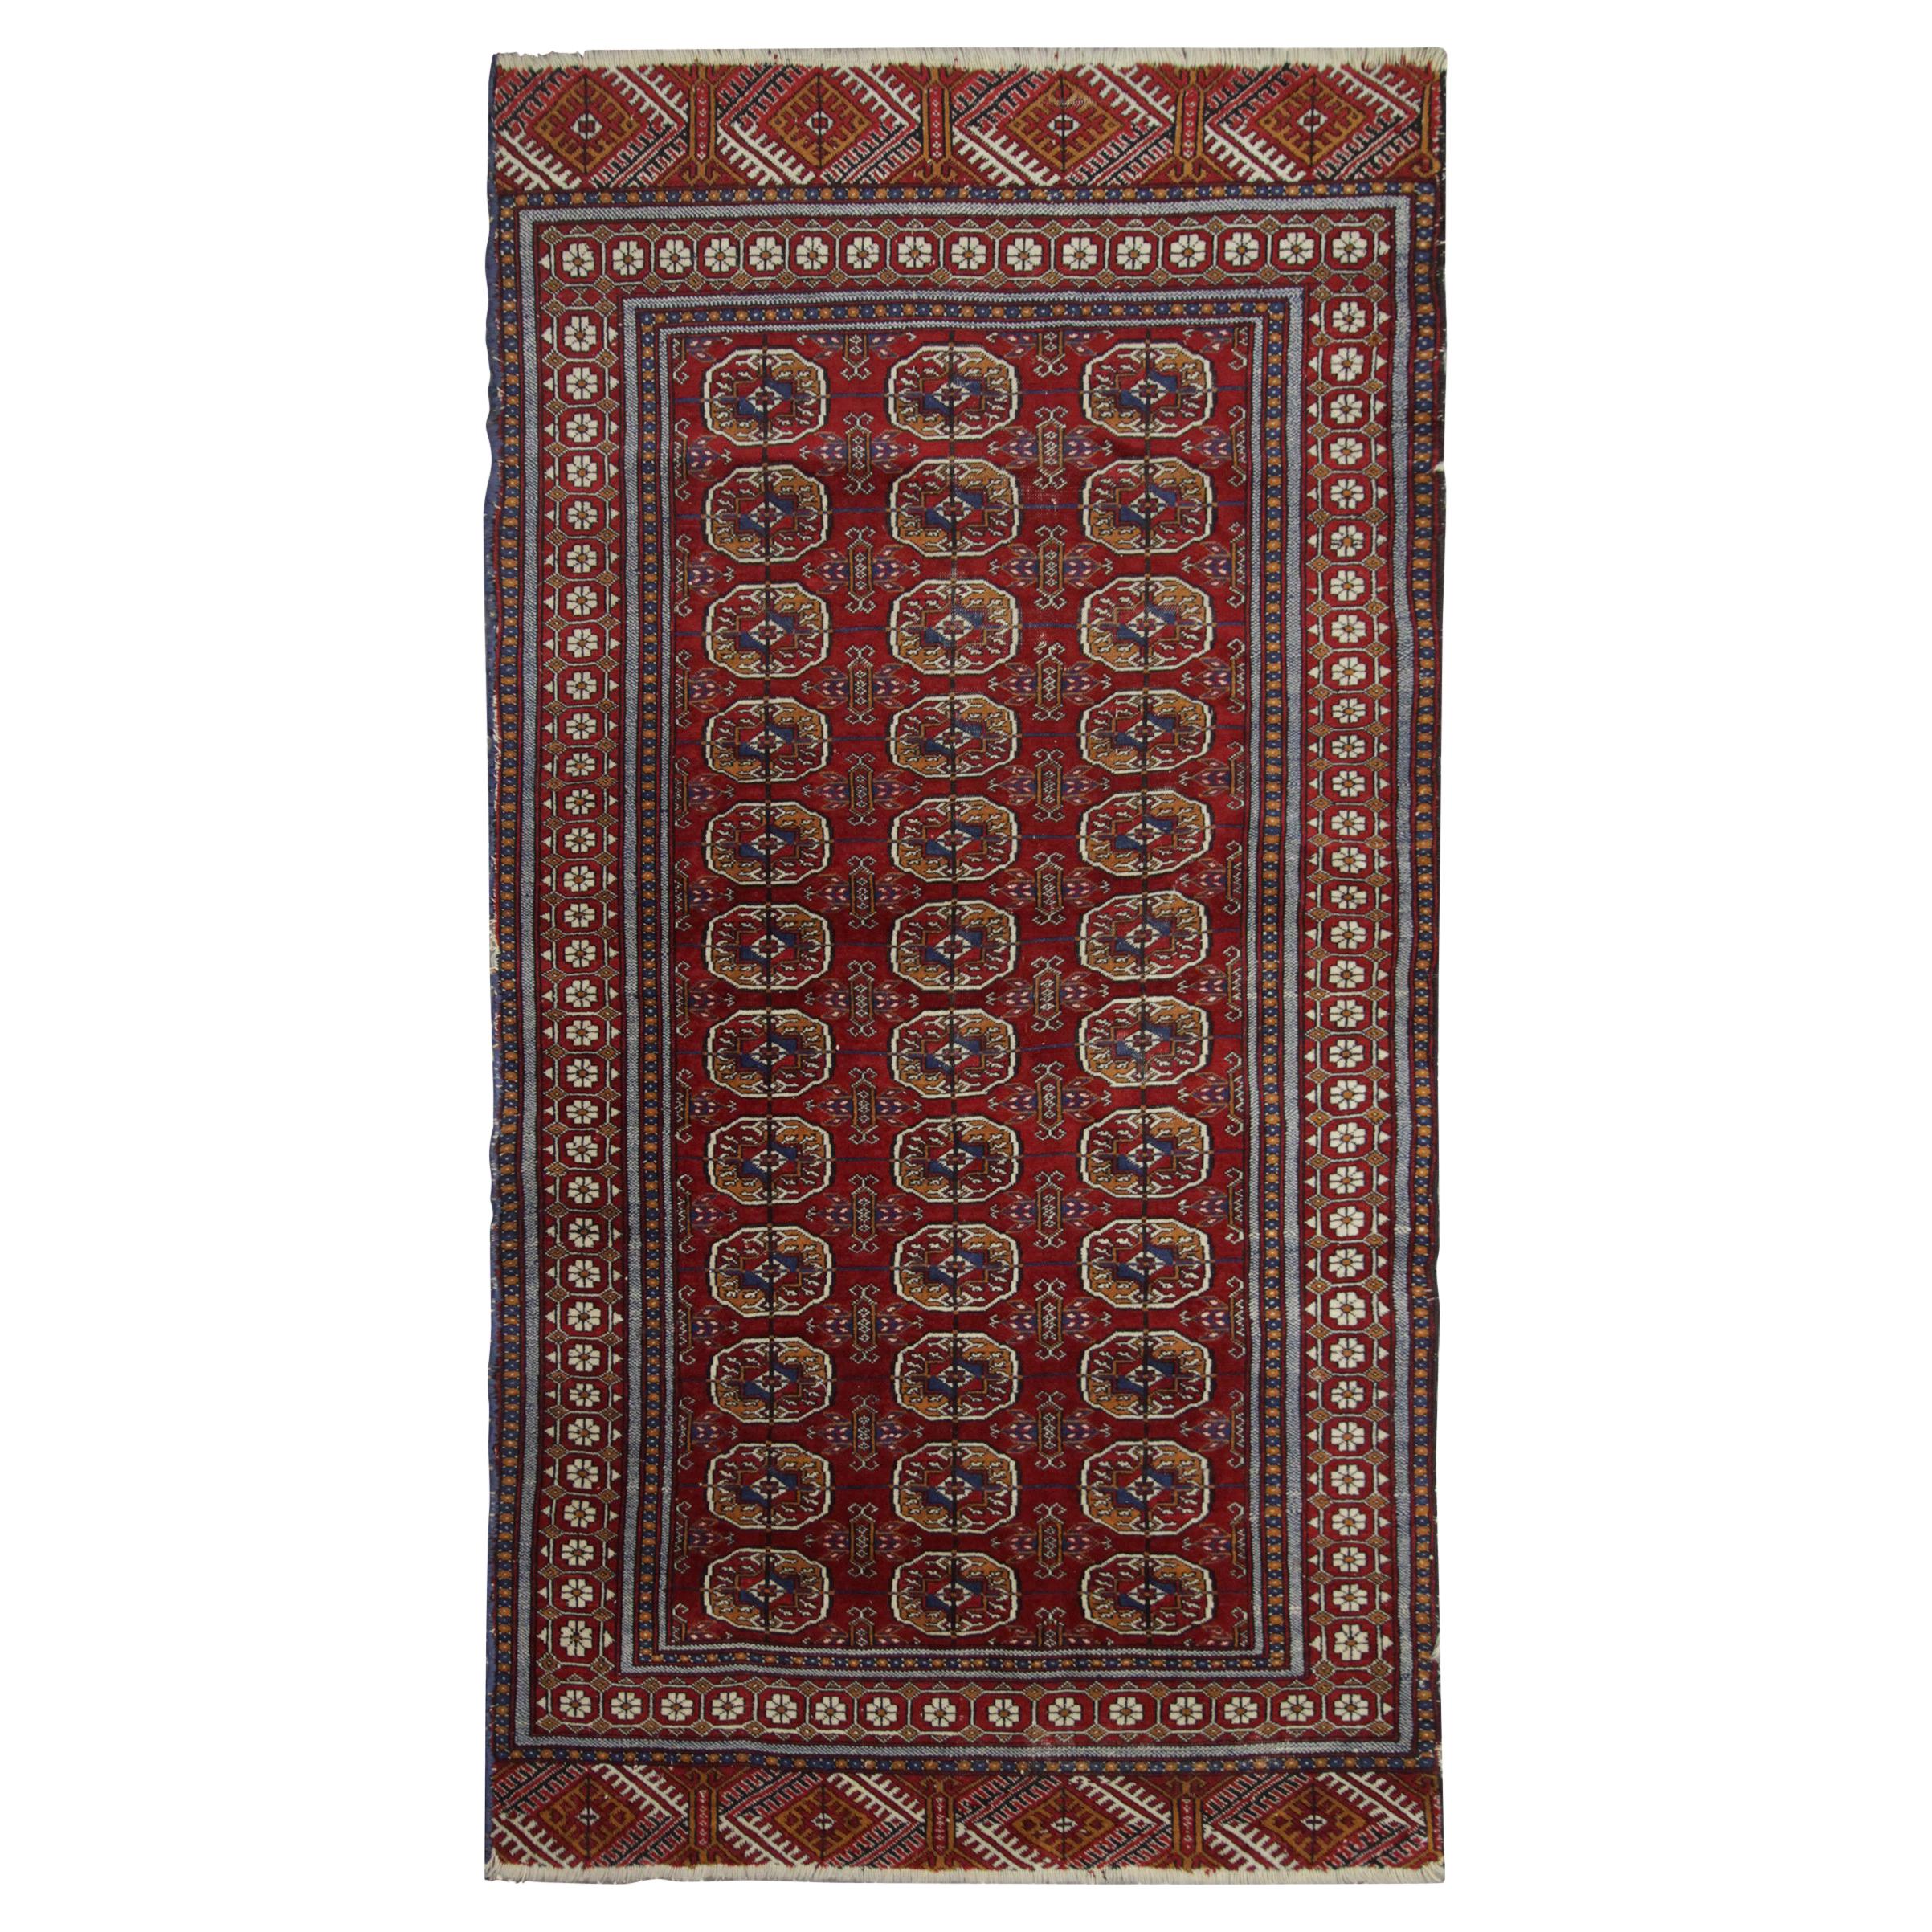 Antique Rugs Bukhara Area Rug Handwoven Red Wool Oriental Carpet For Sale